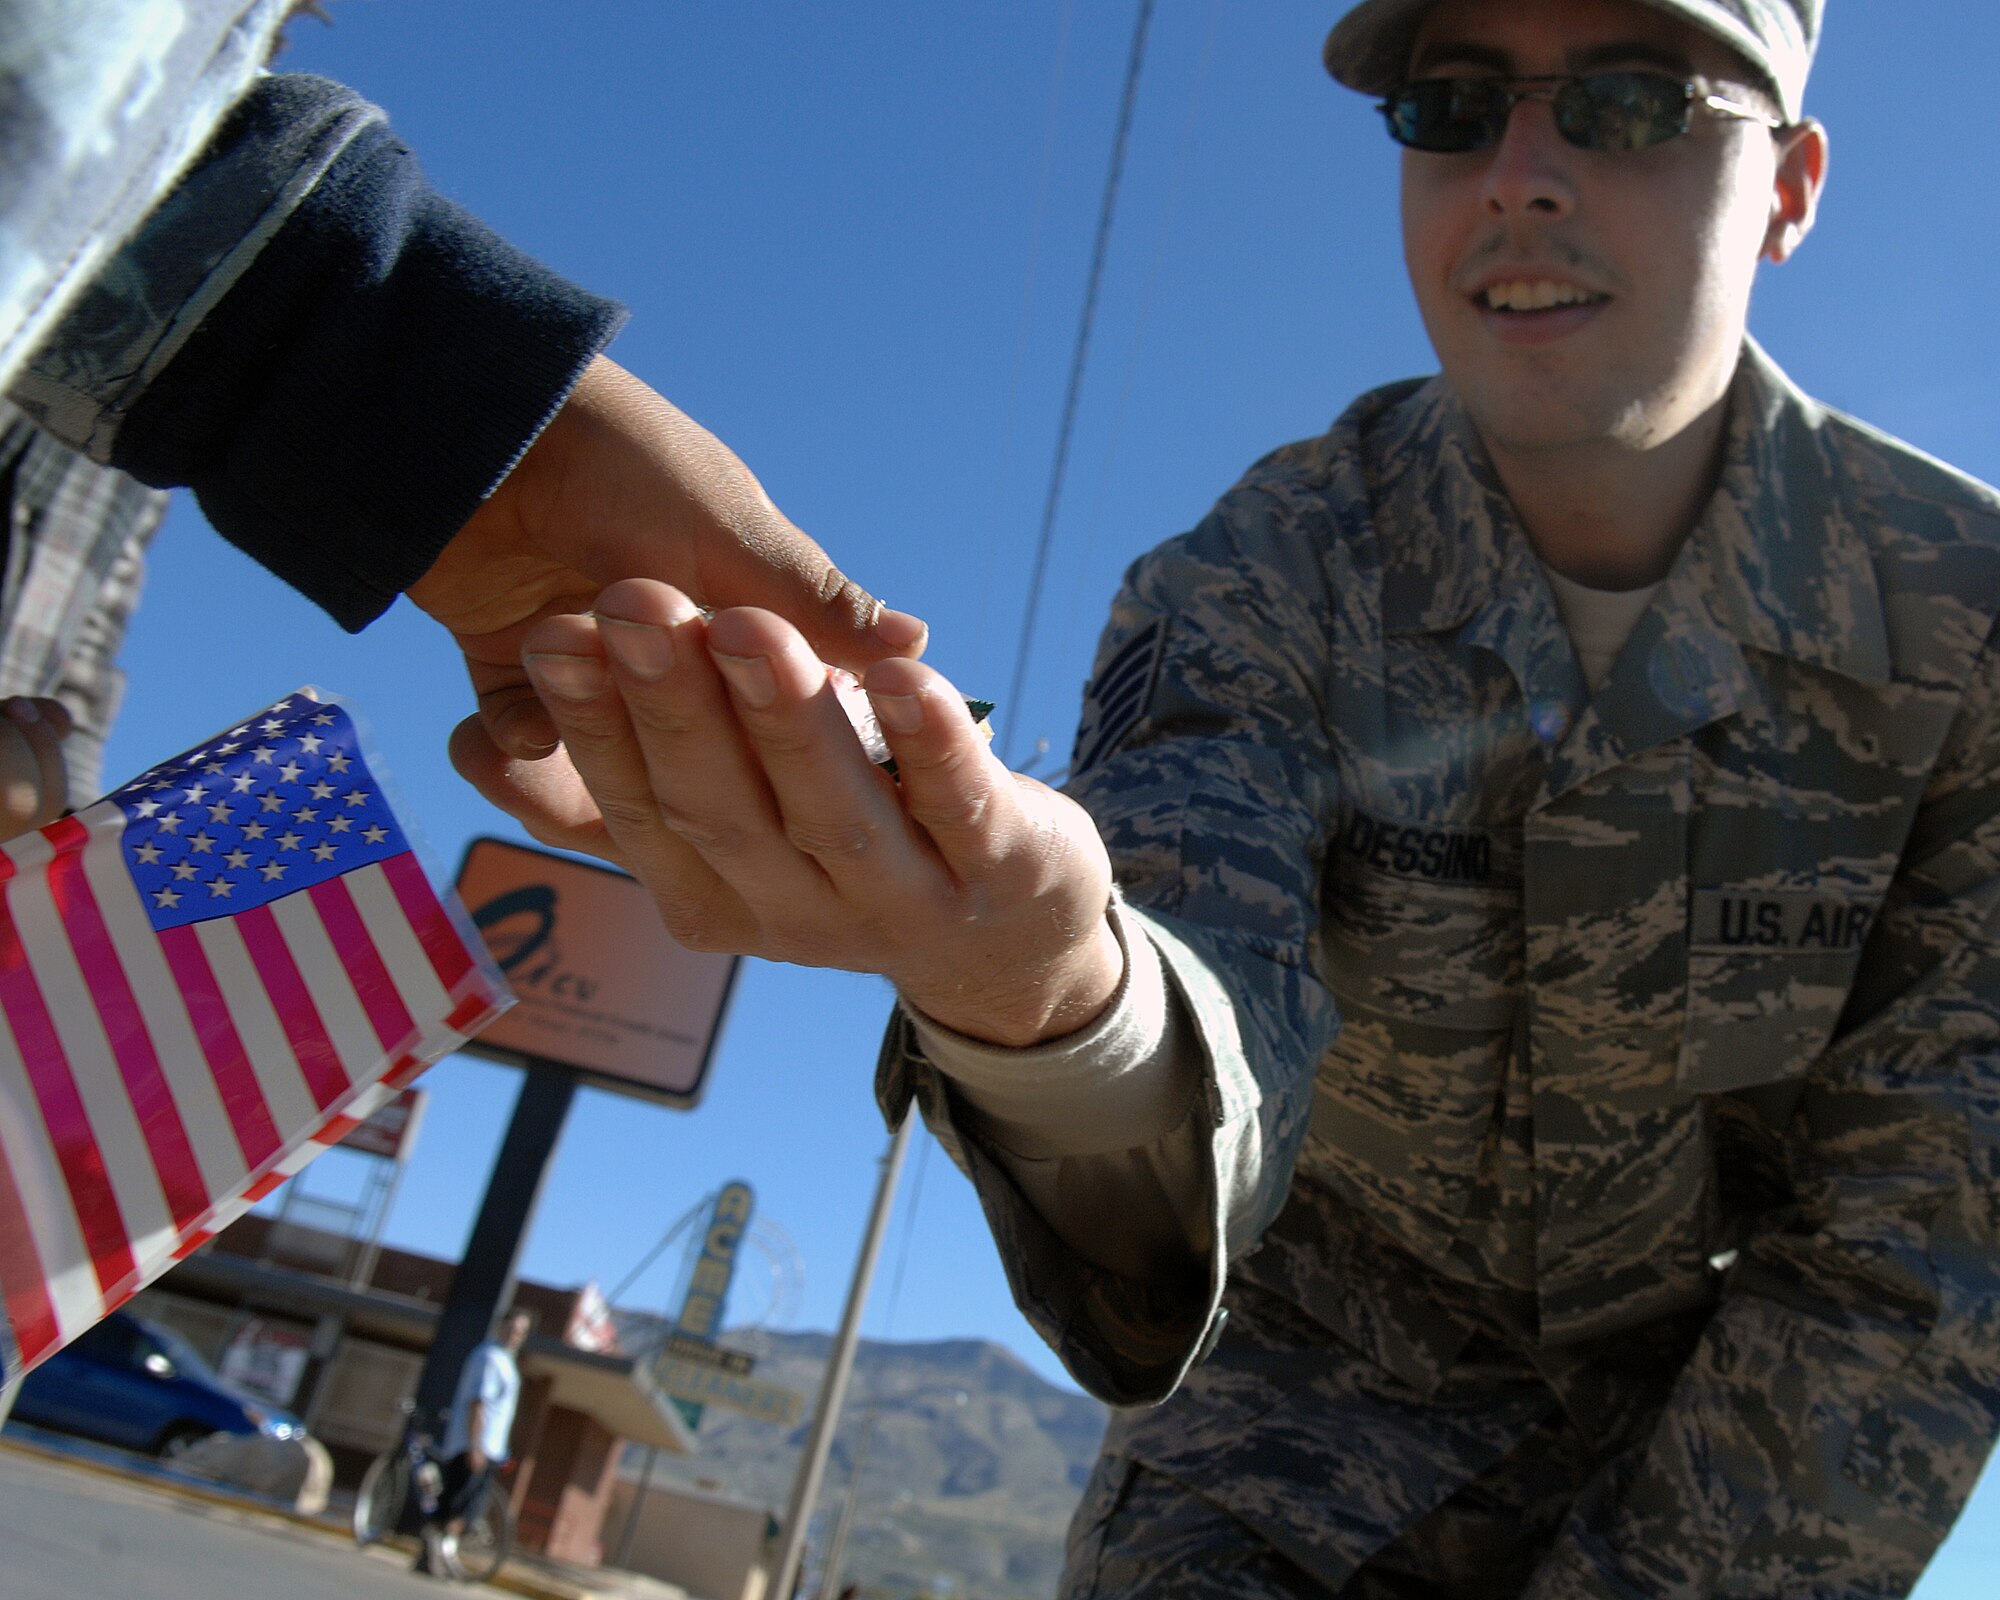 Amember of Holloman Air Force Base, N.M., passes out candy to children during the Veterans Day parade Nov. 8, in Alamogordo, N.M. The Veterans Day National Ceremony is Nov. 11 each year at Arlington National Cemetery.



(U.S. Air Force photo/ Senior Airman Anthony Nelson)
